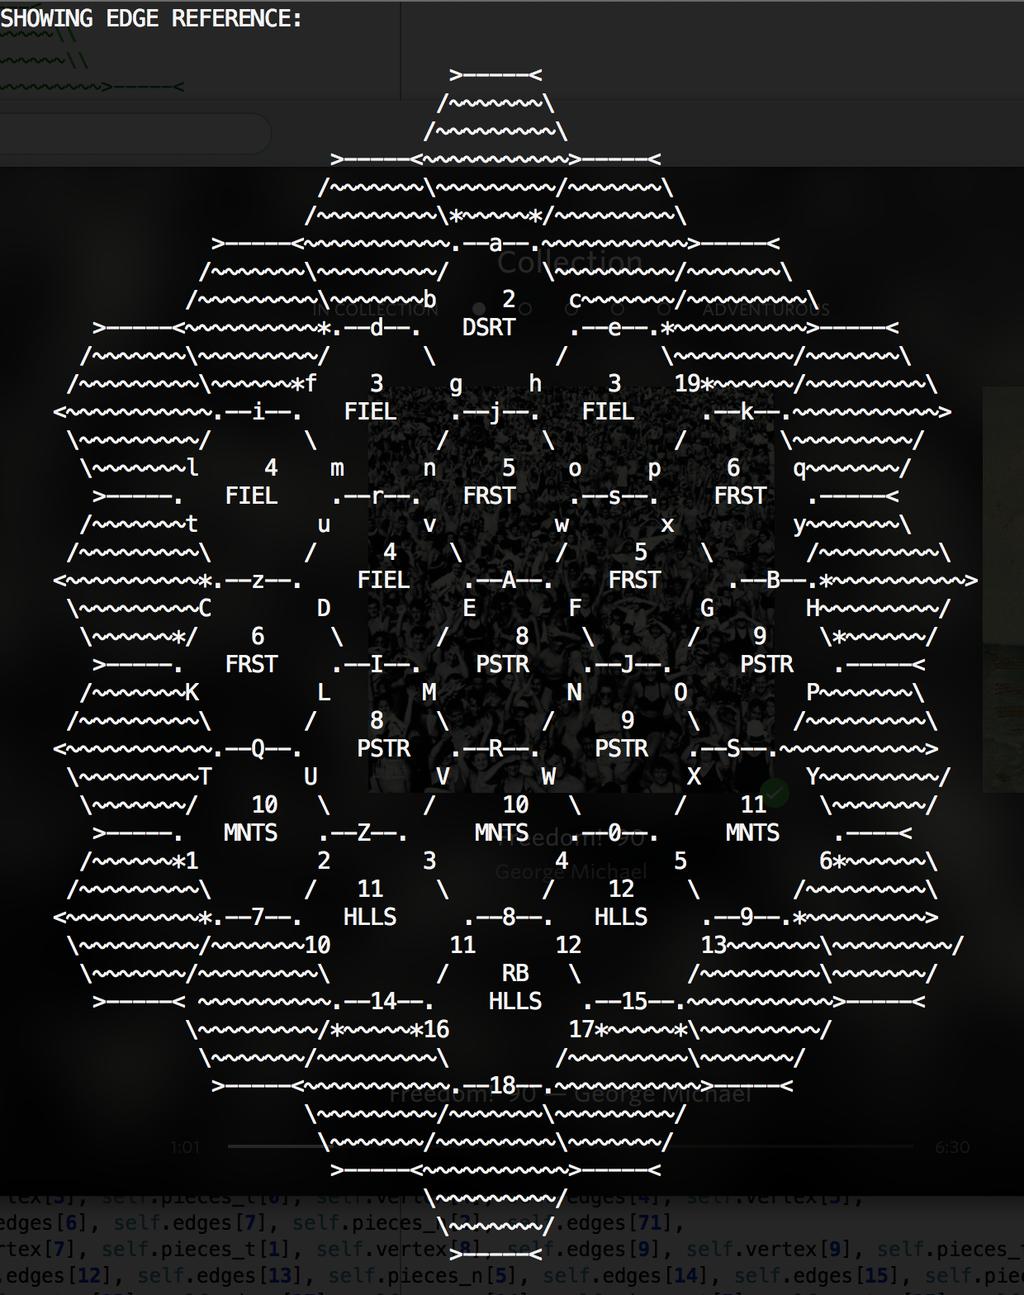 Figure 1: The view of the generated board after the above process. As you can see each hexagonal tile has an associated number and resource. 4.